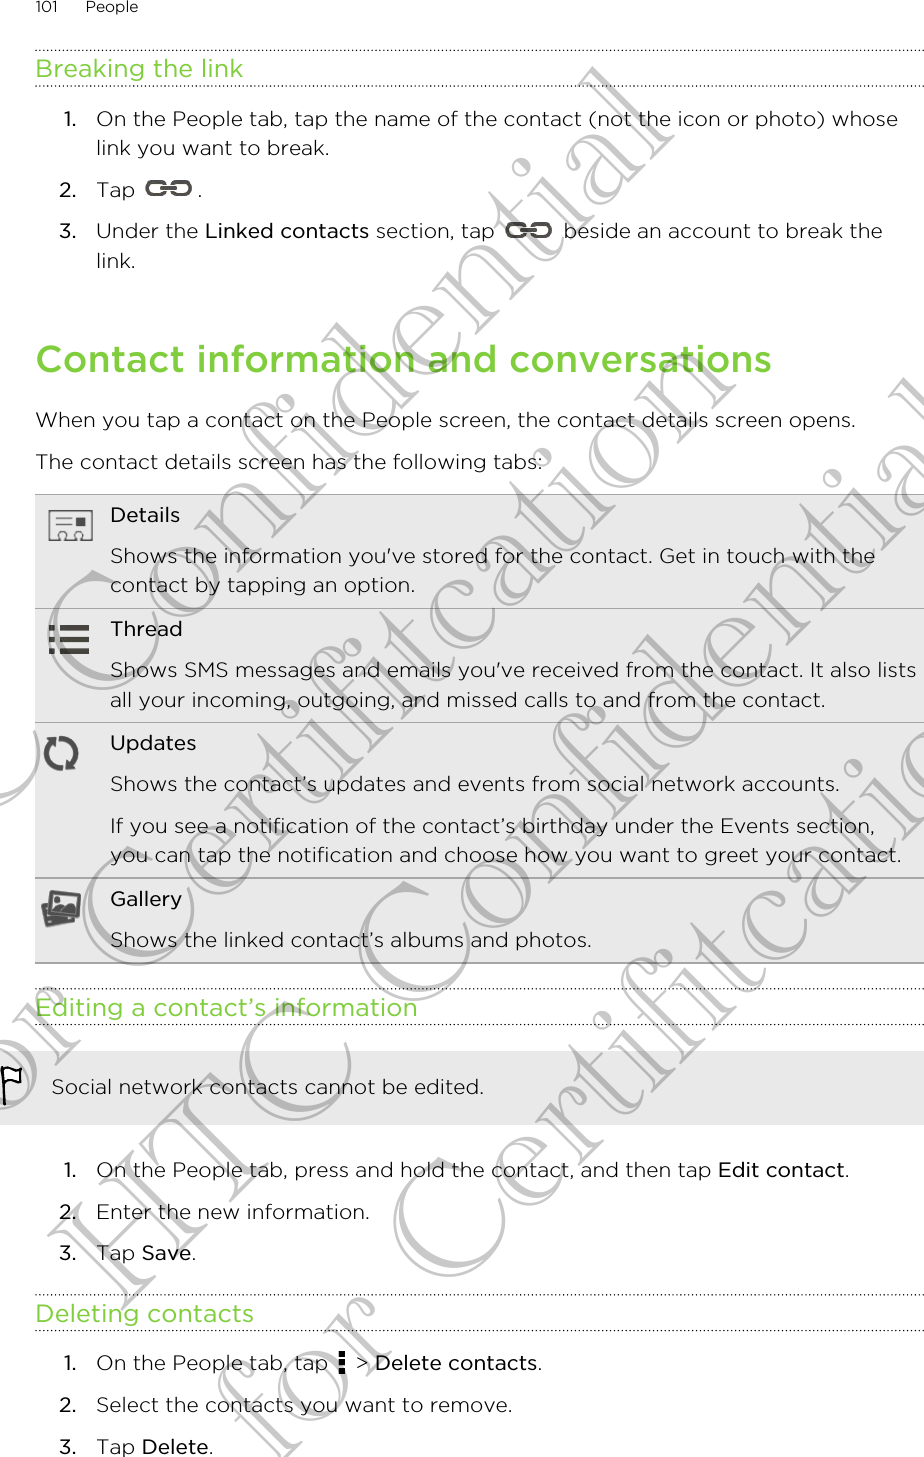 Breaking the link1. On the People tab, tap the name of the contact (not the icon or photo) whoselink you want to break.2. Tap  .3. Under the Linked contacts section, tap   beside an account to break thelink.Contact information and conversationsWhen you tap a contact on the People screen, the contact details screen opens.The contact details screen has the following tabs:DetailsShows the information you&apos;ve stored for the contact. Get in touch with thecontact by tapping an option.ThreadShows SMS messages and emails you&apos;ve received from the contact. It also listsall your incoming, outgoing, and missed calls to and from the contact.UpdatesShows the contact’s updates and events from social network accounts.If you see a notification of the contact’s birthday under the Events section,you can tap the notification and choose how you want to greet your contact.GalleryShows the linked contact’s albums and photos.Editing a contact’s informationSocial network contacts cannot be edited.1. On the People tab, press and hold the contact, and then tap Edit contact.2. Enter the new information.3. Tap Save.Deleting contacts1. On the People tab, tap   &gt; Delete contacts.2. Select the contacts you want to remove.3. Tap Delete.101 PeopleHTC Confidential for Certifitcation HTC Confidential for Certifitcation